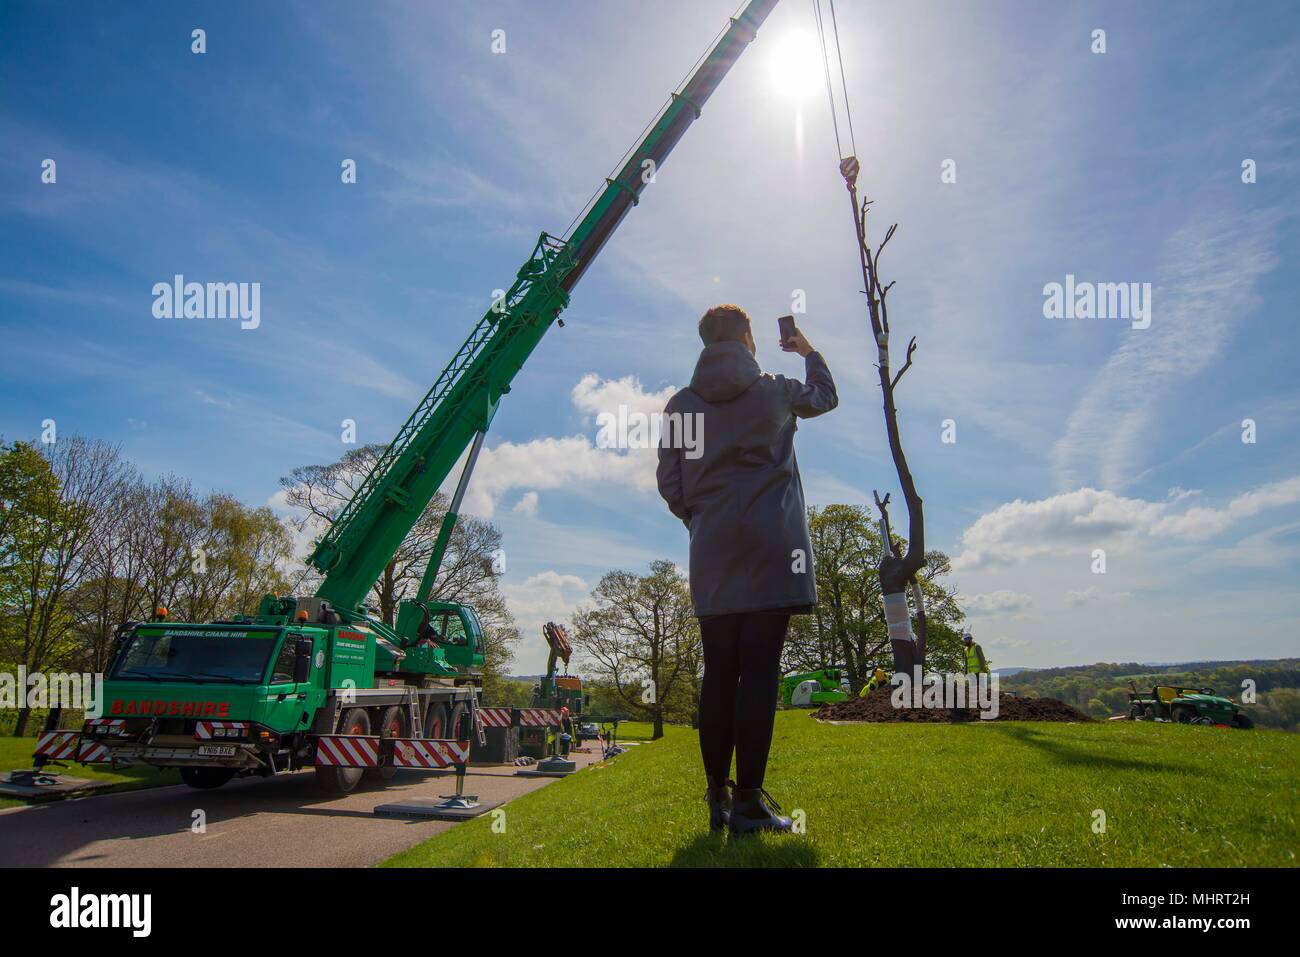 Yorkshire Sculpture Park, UK. 3rd May 2018. A visitor to Yorkshire Sculpture Park takes a picture of ‘Vene di pietra tra i rami’ by Italian artist Giuseppe Penone. The sculpture was installed on Thursday 3rd May by technicians at the West Yorkshire based park. The major exhibition ‘A Tree in the Wood’ officially opens on 26th May and features works drawn from the past five decades of Penone’s career. Picture: Scott Bairstow/Alamy Live News Stock Photo